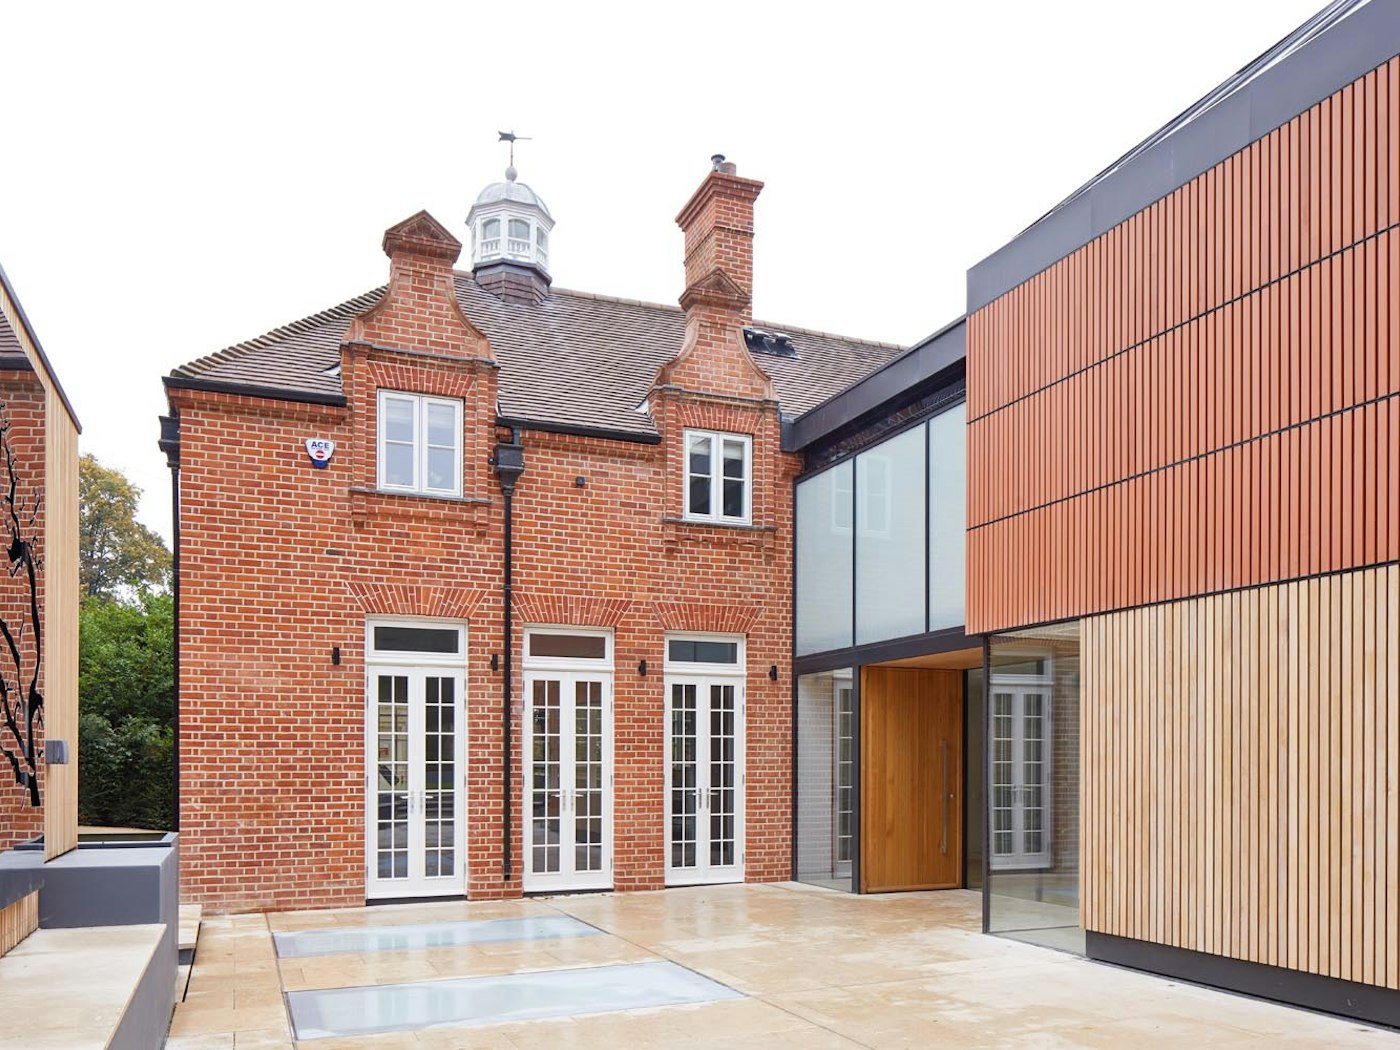 The warmth of the iroko front door works beautifully with the red brick and white windows of this house